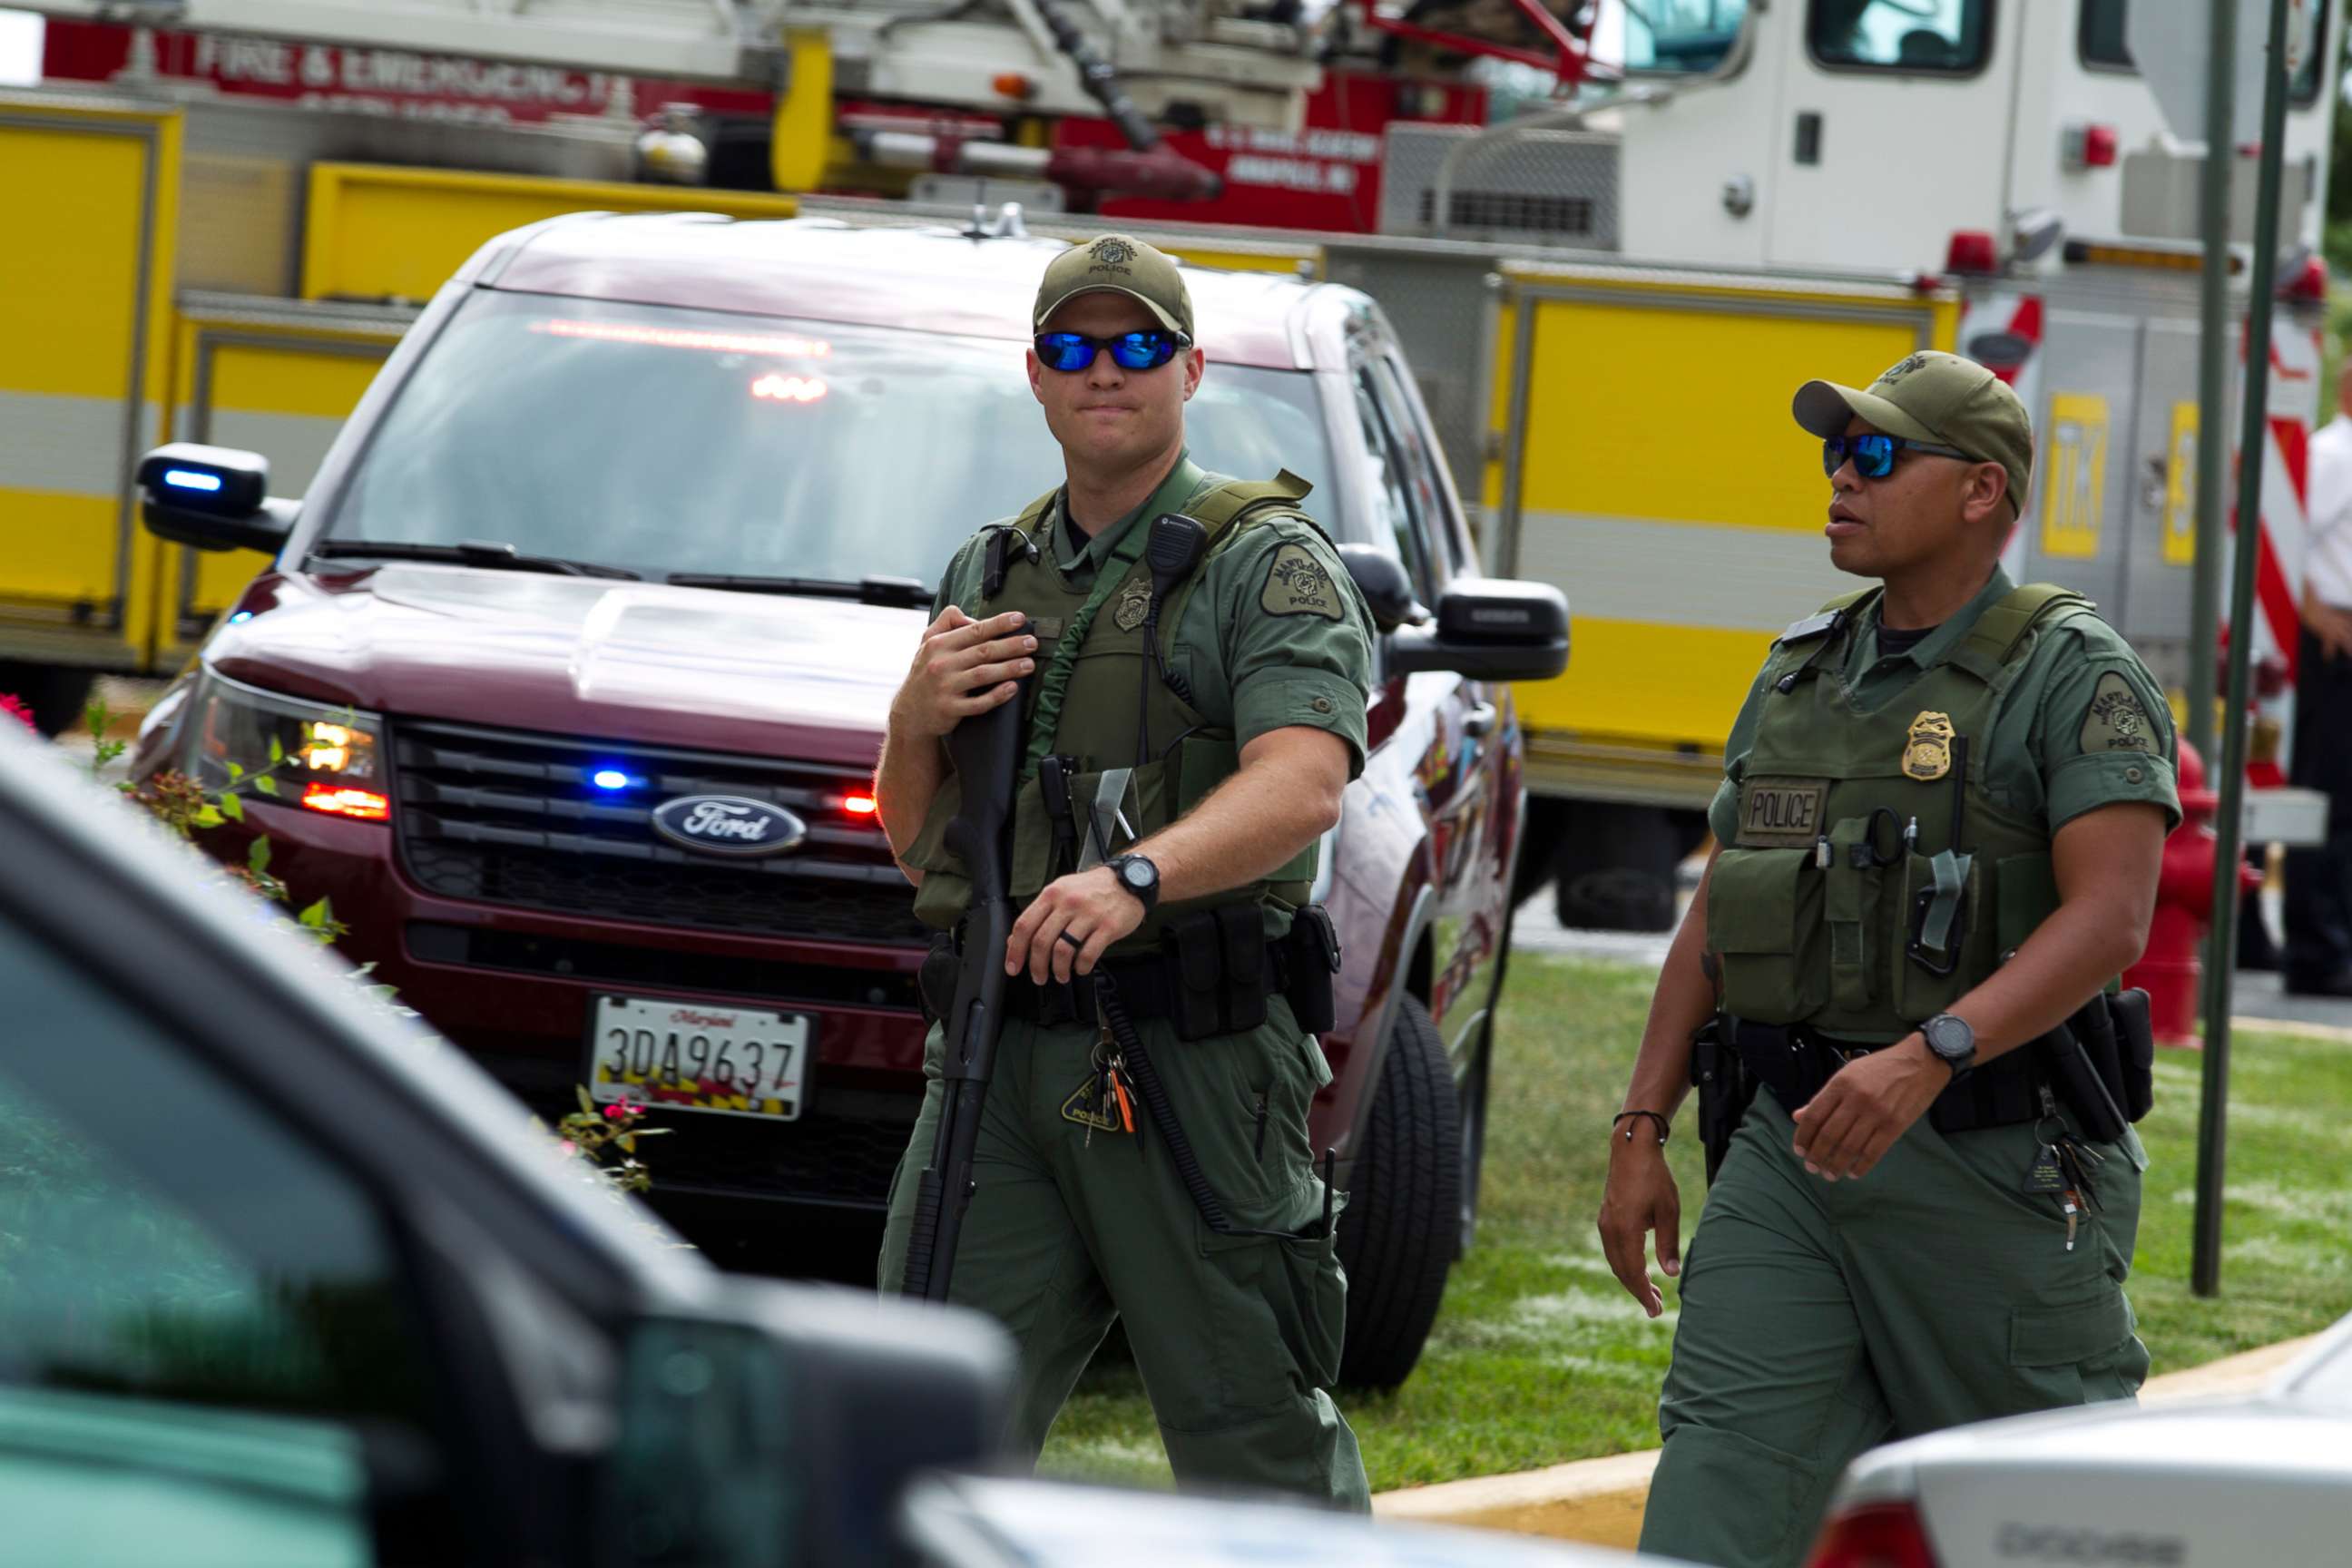 PHOTO: Maryland police officers patrol the area after multiple people were shot at at The Capital Gazette newspaper in Annapolis, Md., June 28, 2018.